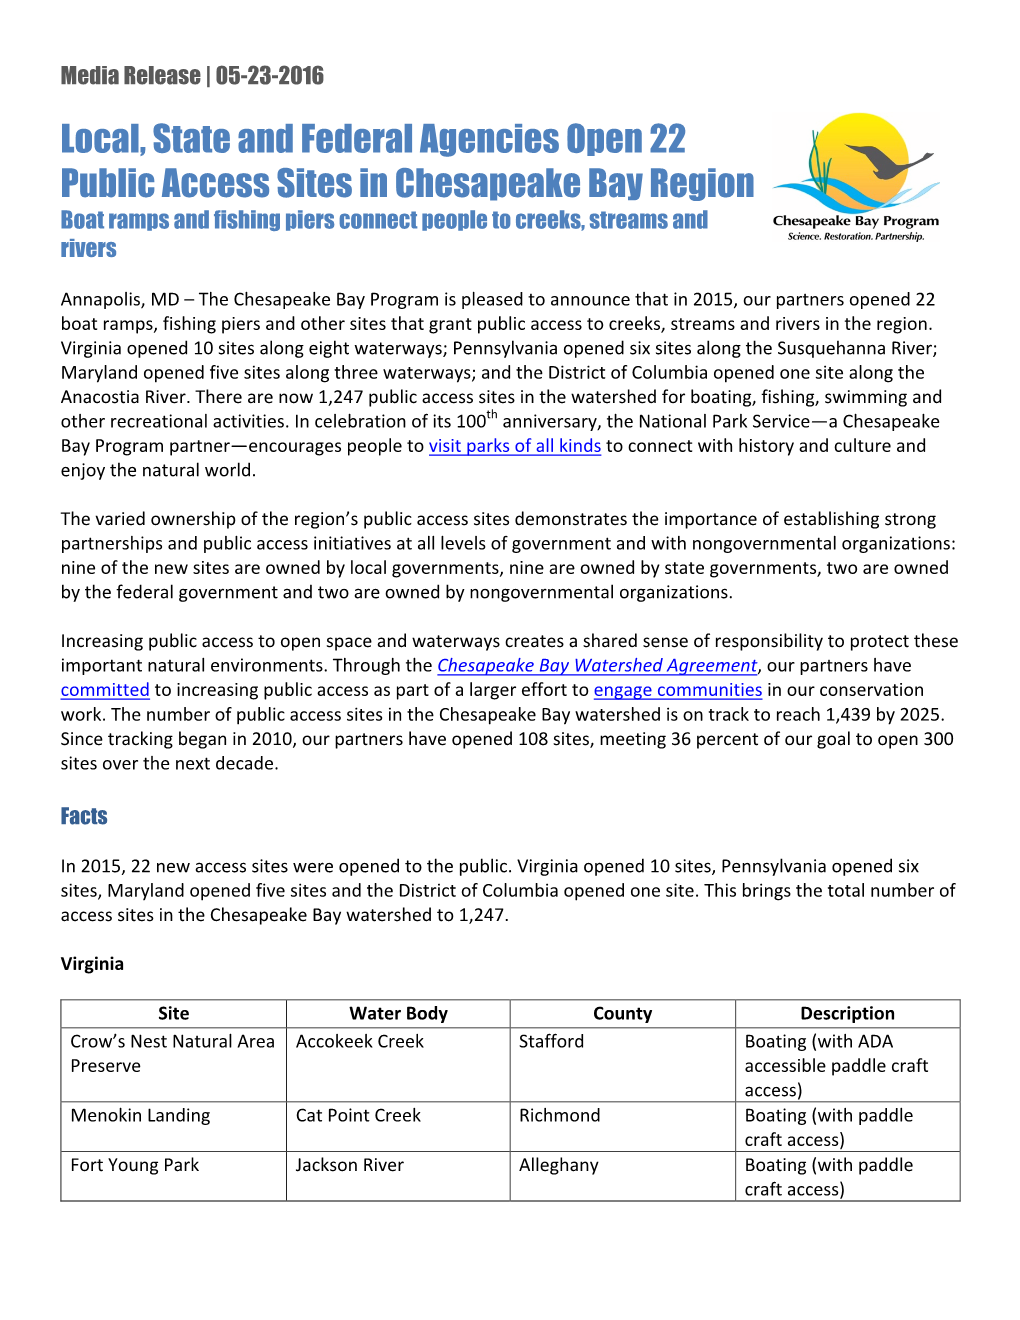 Local, State and Federal Agencies Open 22 Public Access Sites in Chesapeake Bay Region Boat Ramps and Fishing Piers Connect People to Creeks, Streams and Rivers